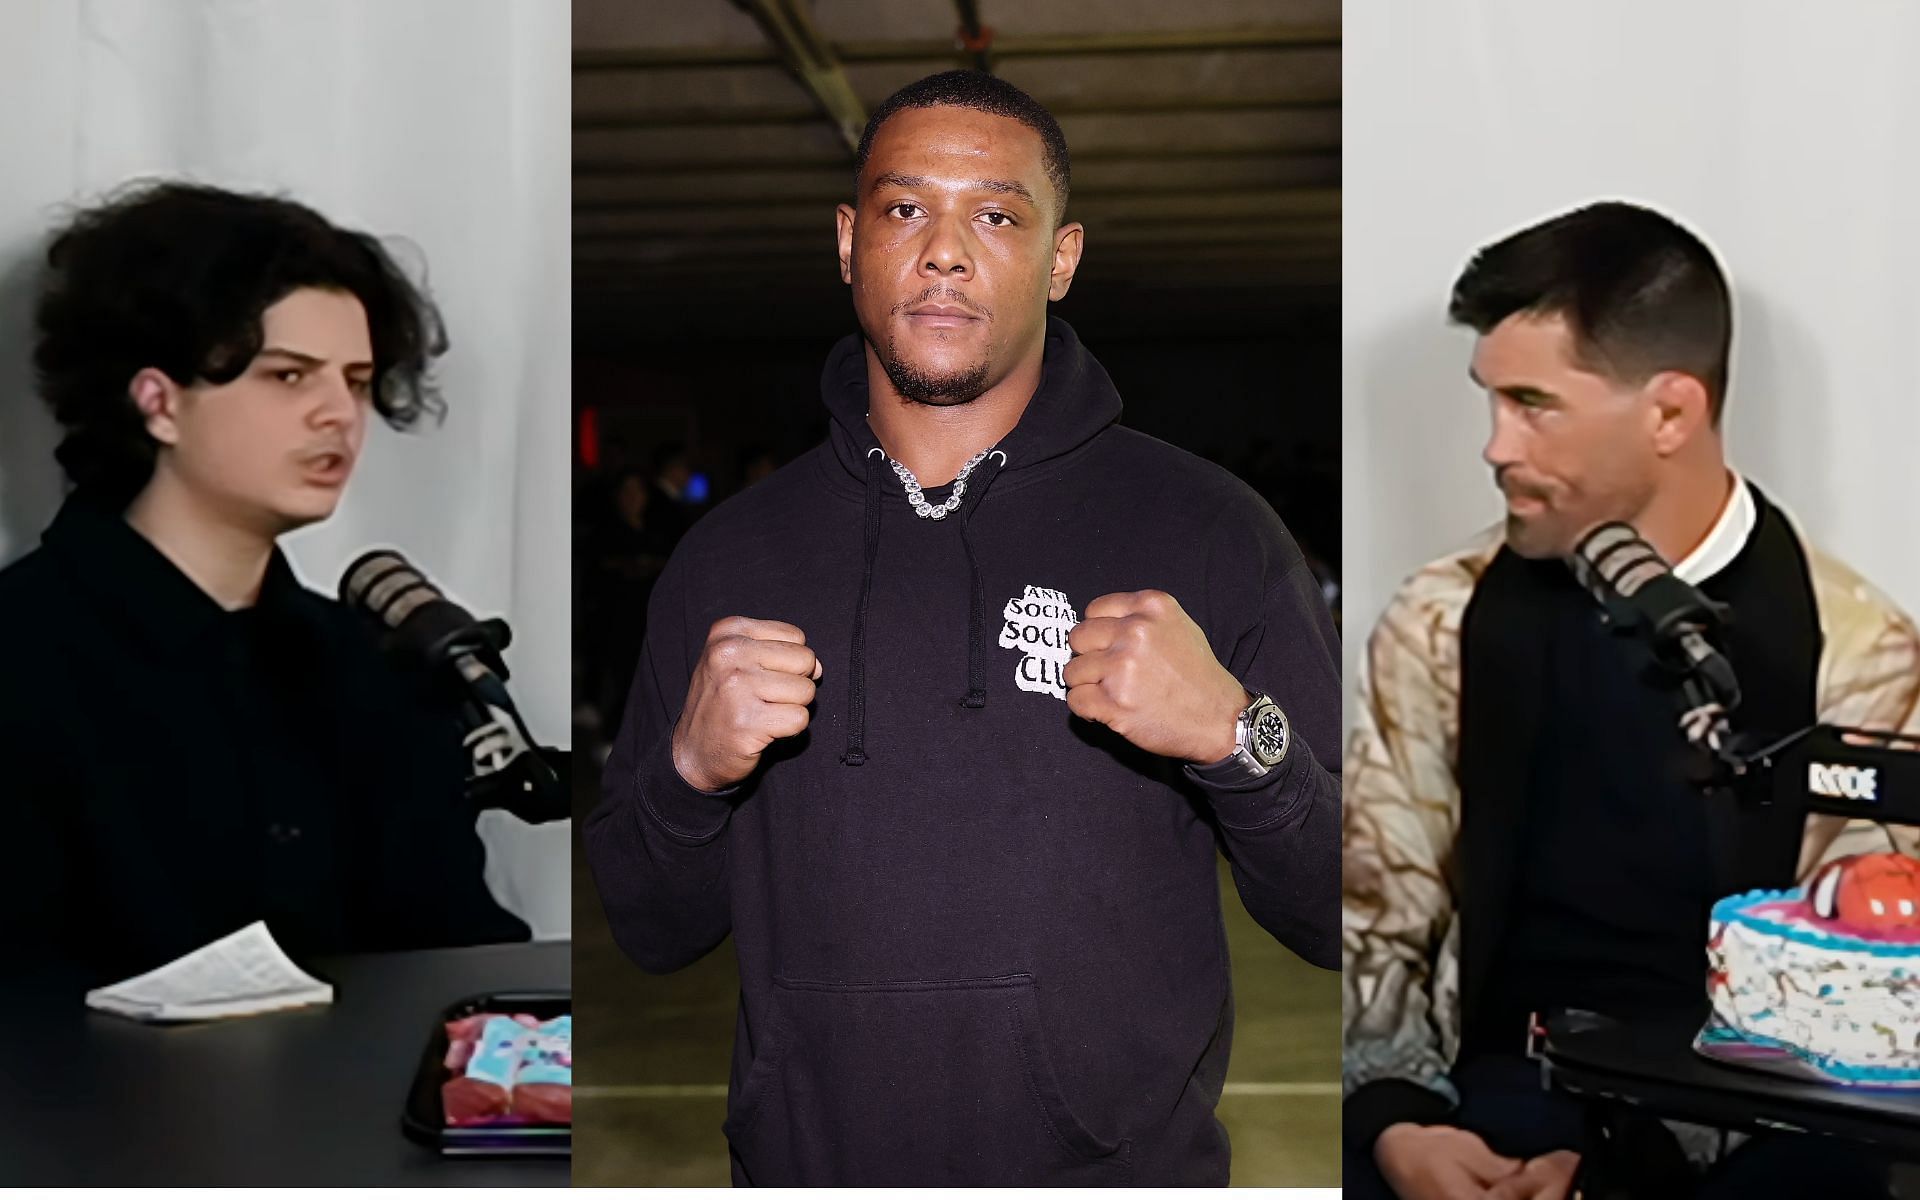 Matan Even (left) and Dominick Cruz (right) debated a hypothetical matchup for Jamahal Hill (centre). [via Getty Images and Matan Even YouTube]